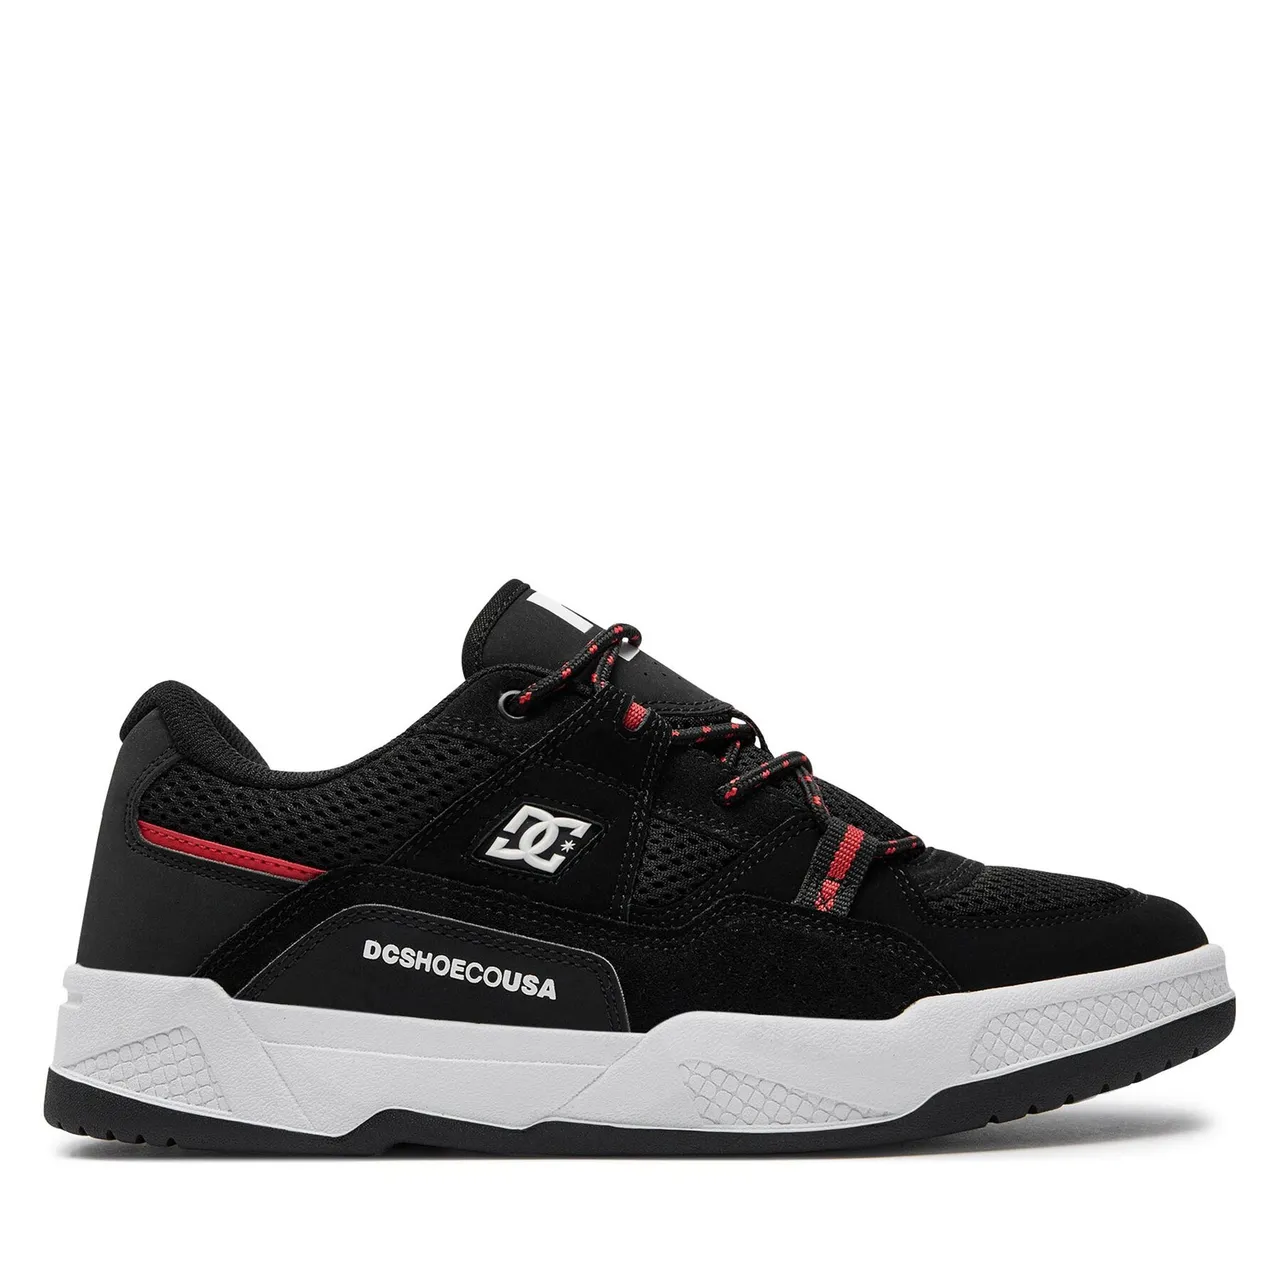 Sneakers DC Construct ADYS100822 Black/Hot Coral KHO